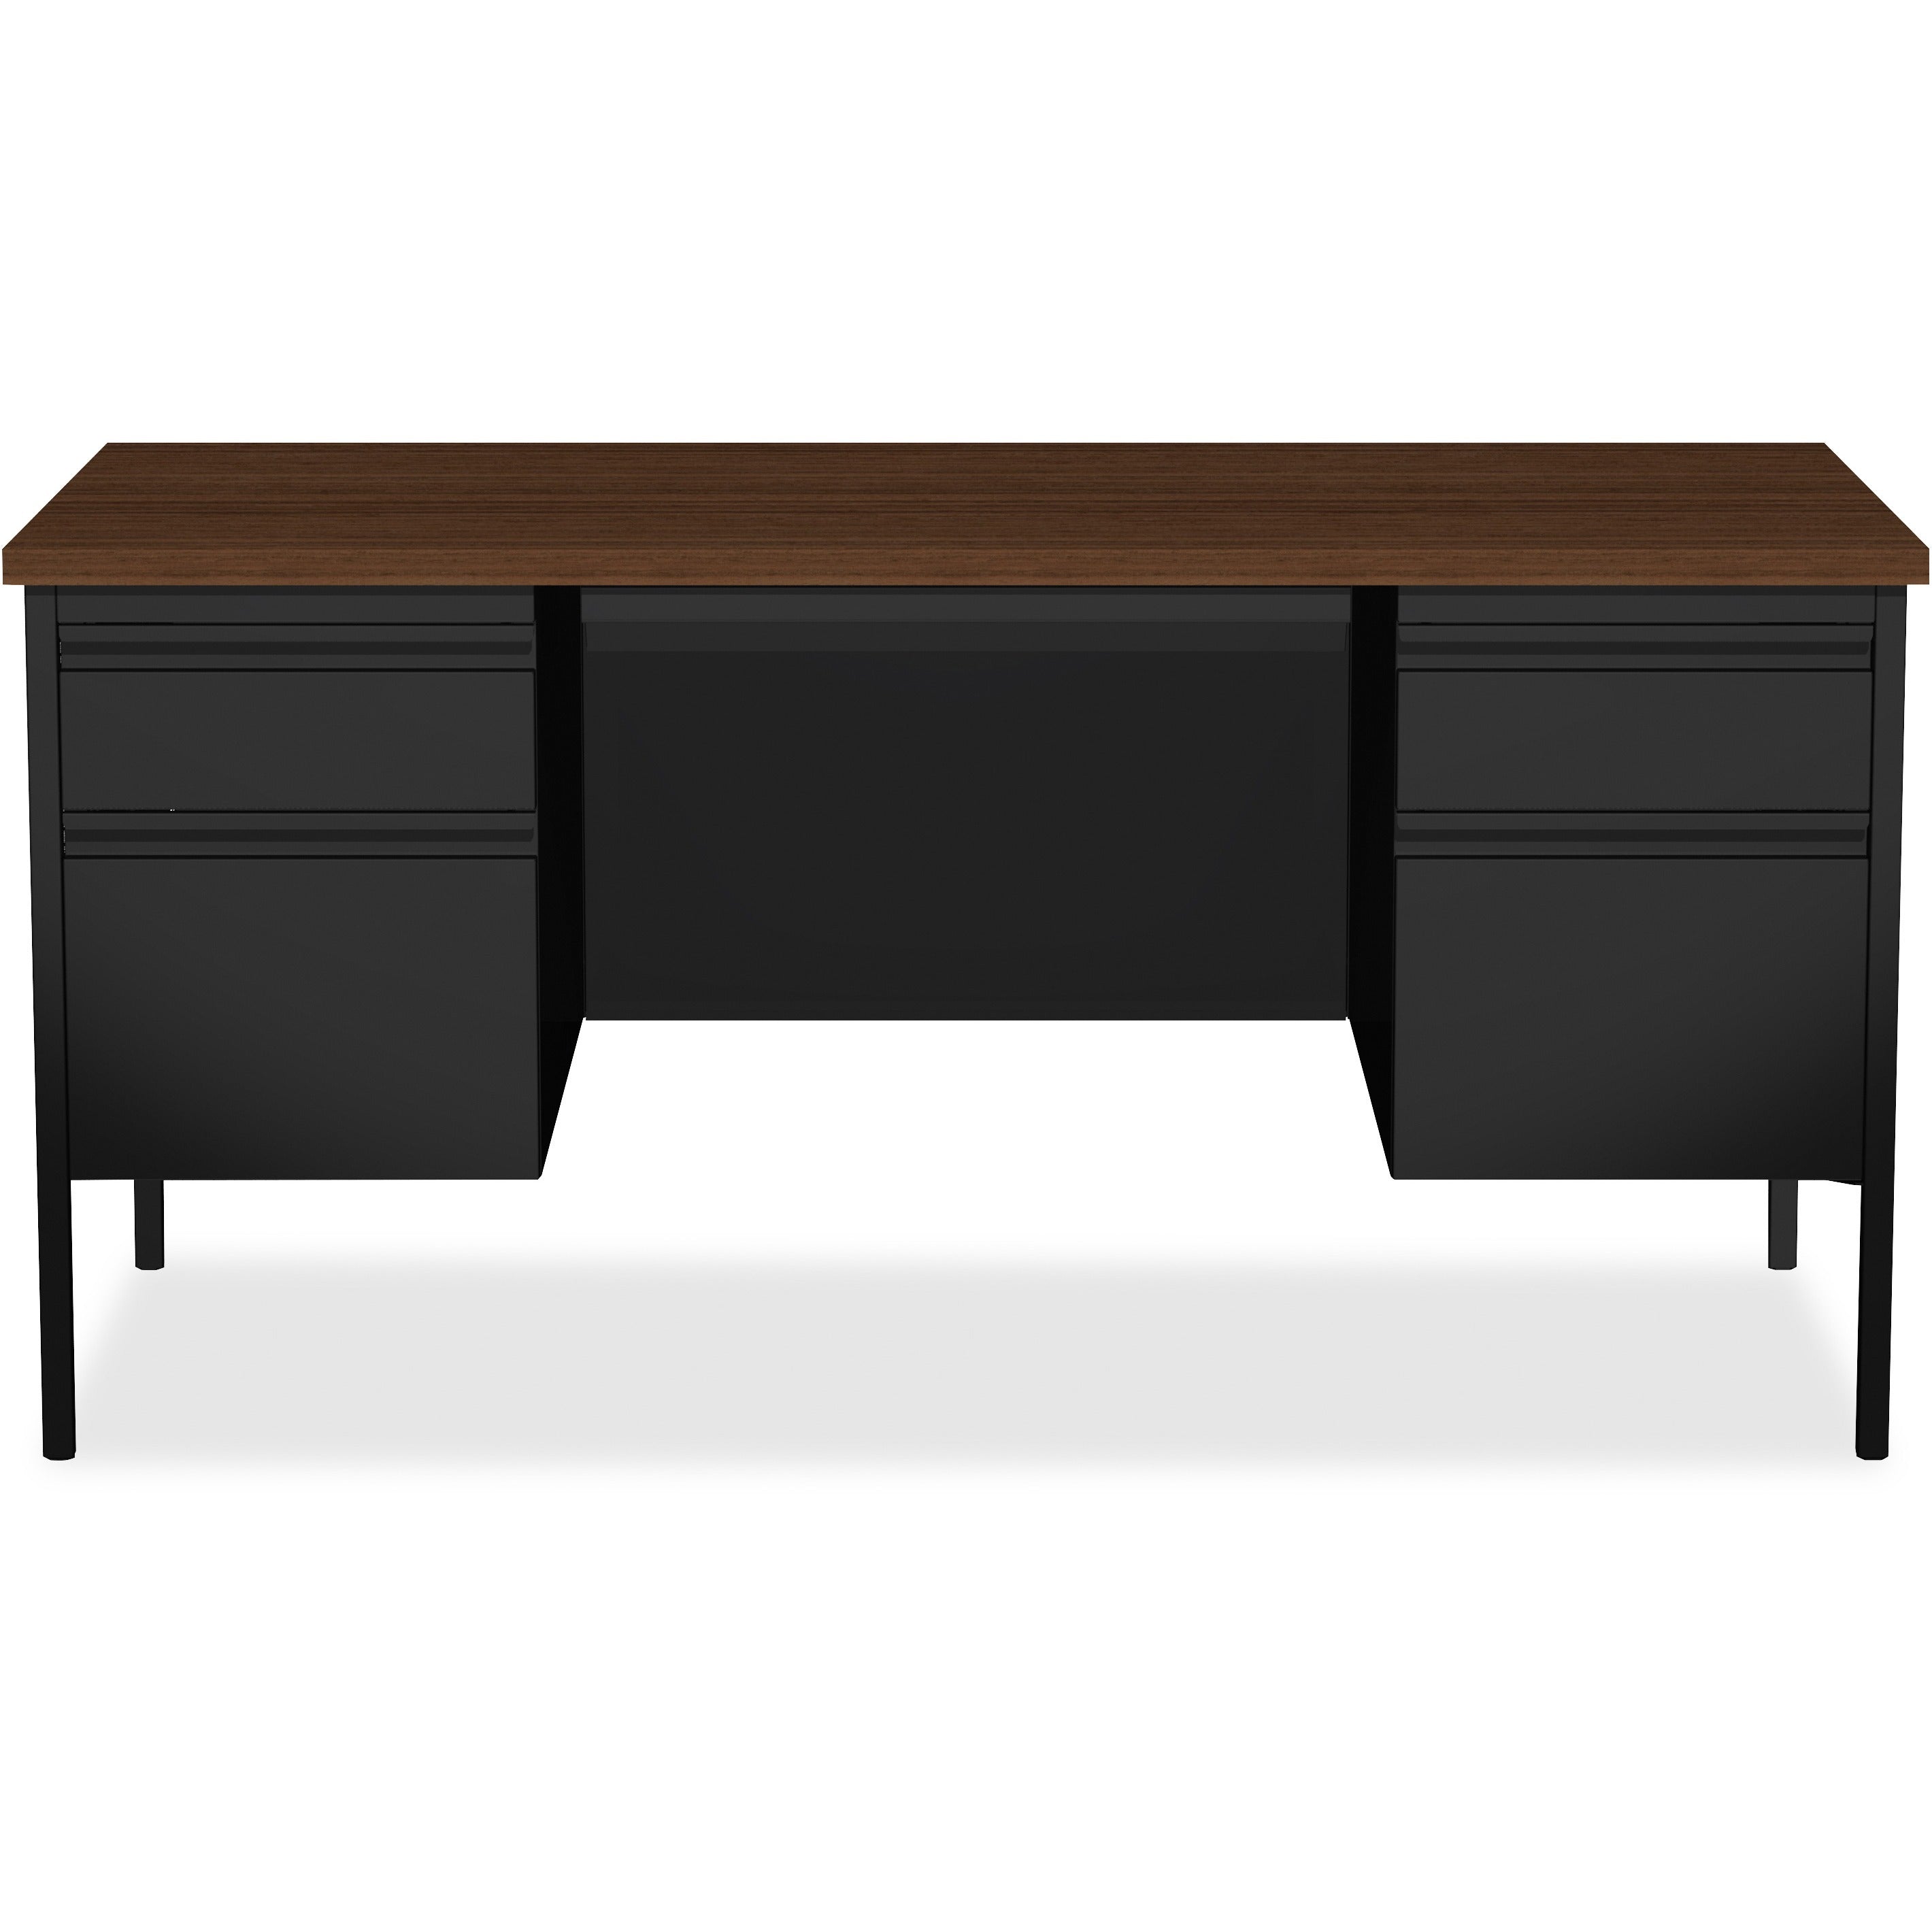 lorell-fortress-series-double-pedestal-desk-for-table-toprectangle-top-x-60-table-top-width-x-30-table-top-depth-x-112-table-top-thickness-2950-height-assembly-required-black-walnut-laminated-walnut-steel-1-each_llr60927 - 2